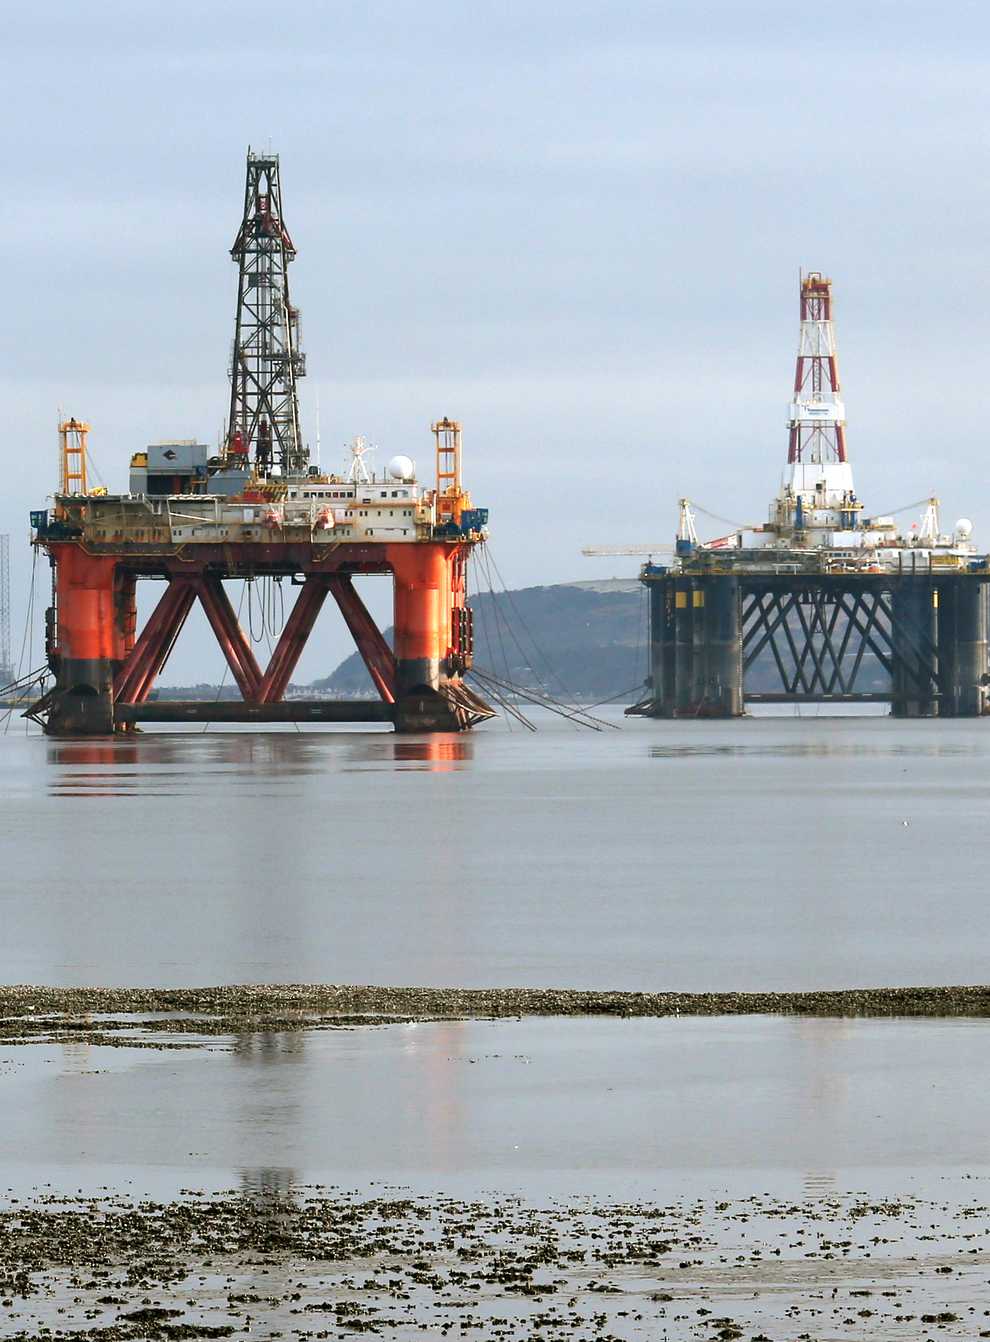 The North Sea oil and gas industry is on track to meet early emissions reduction targets, according to the North Sea Transition Authority (Andrew Milligan/PA)